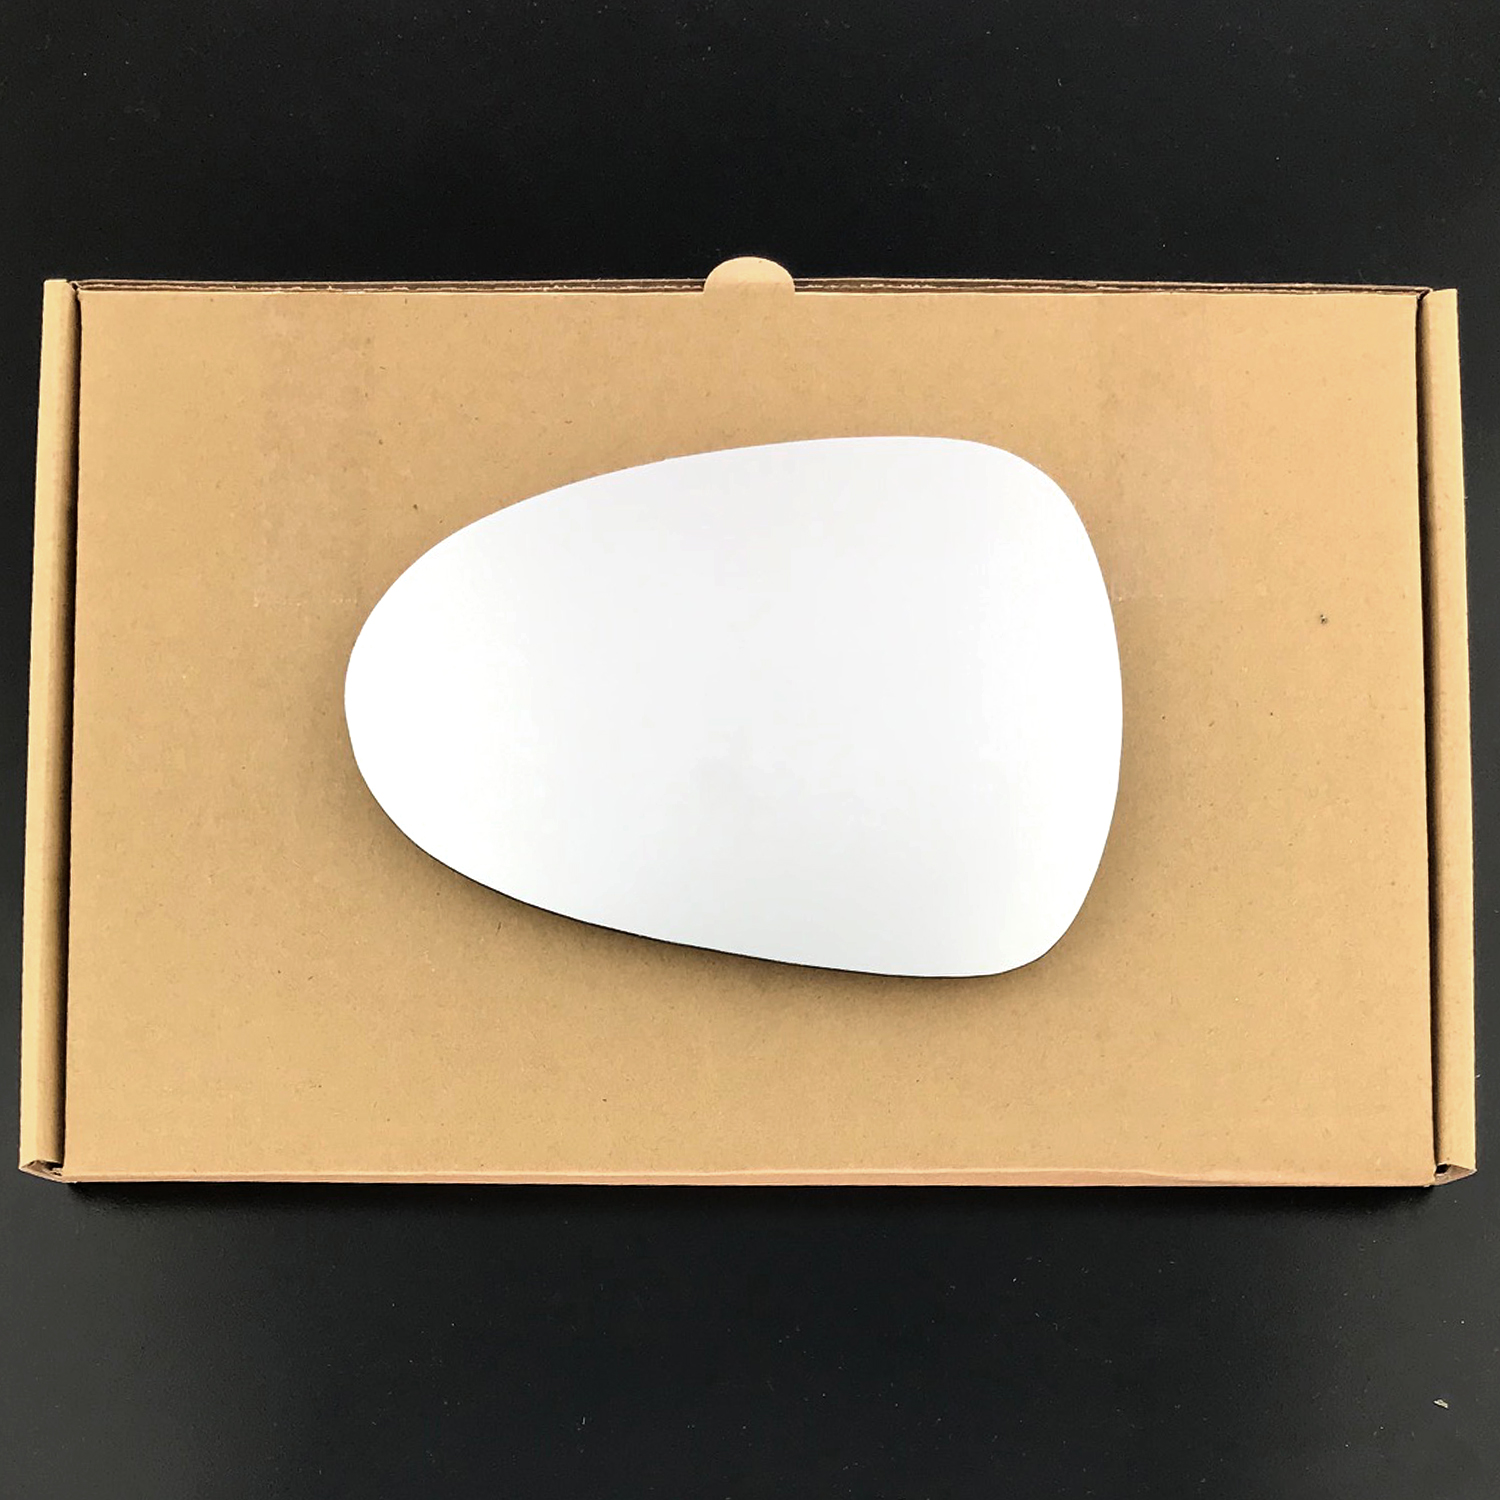 SEAT Leon Wing Mirror Glass LEFT HAND ( UK Passenger Side ) 2009  to 2012 – Convex Wing Mirror